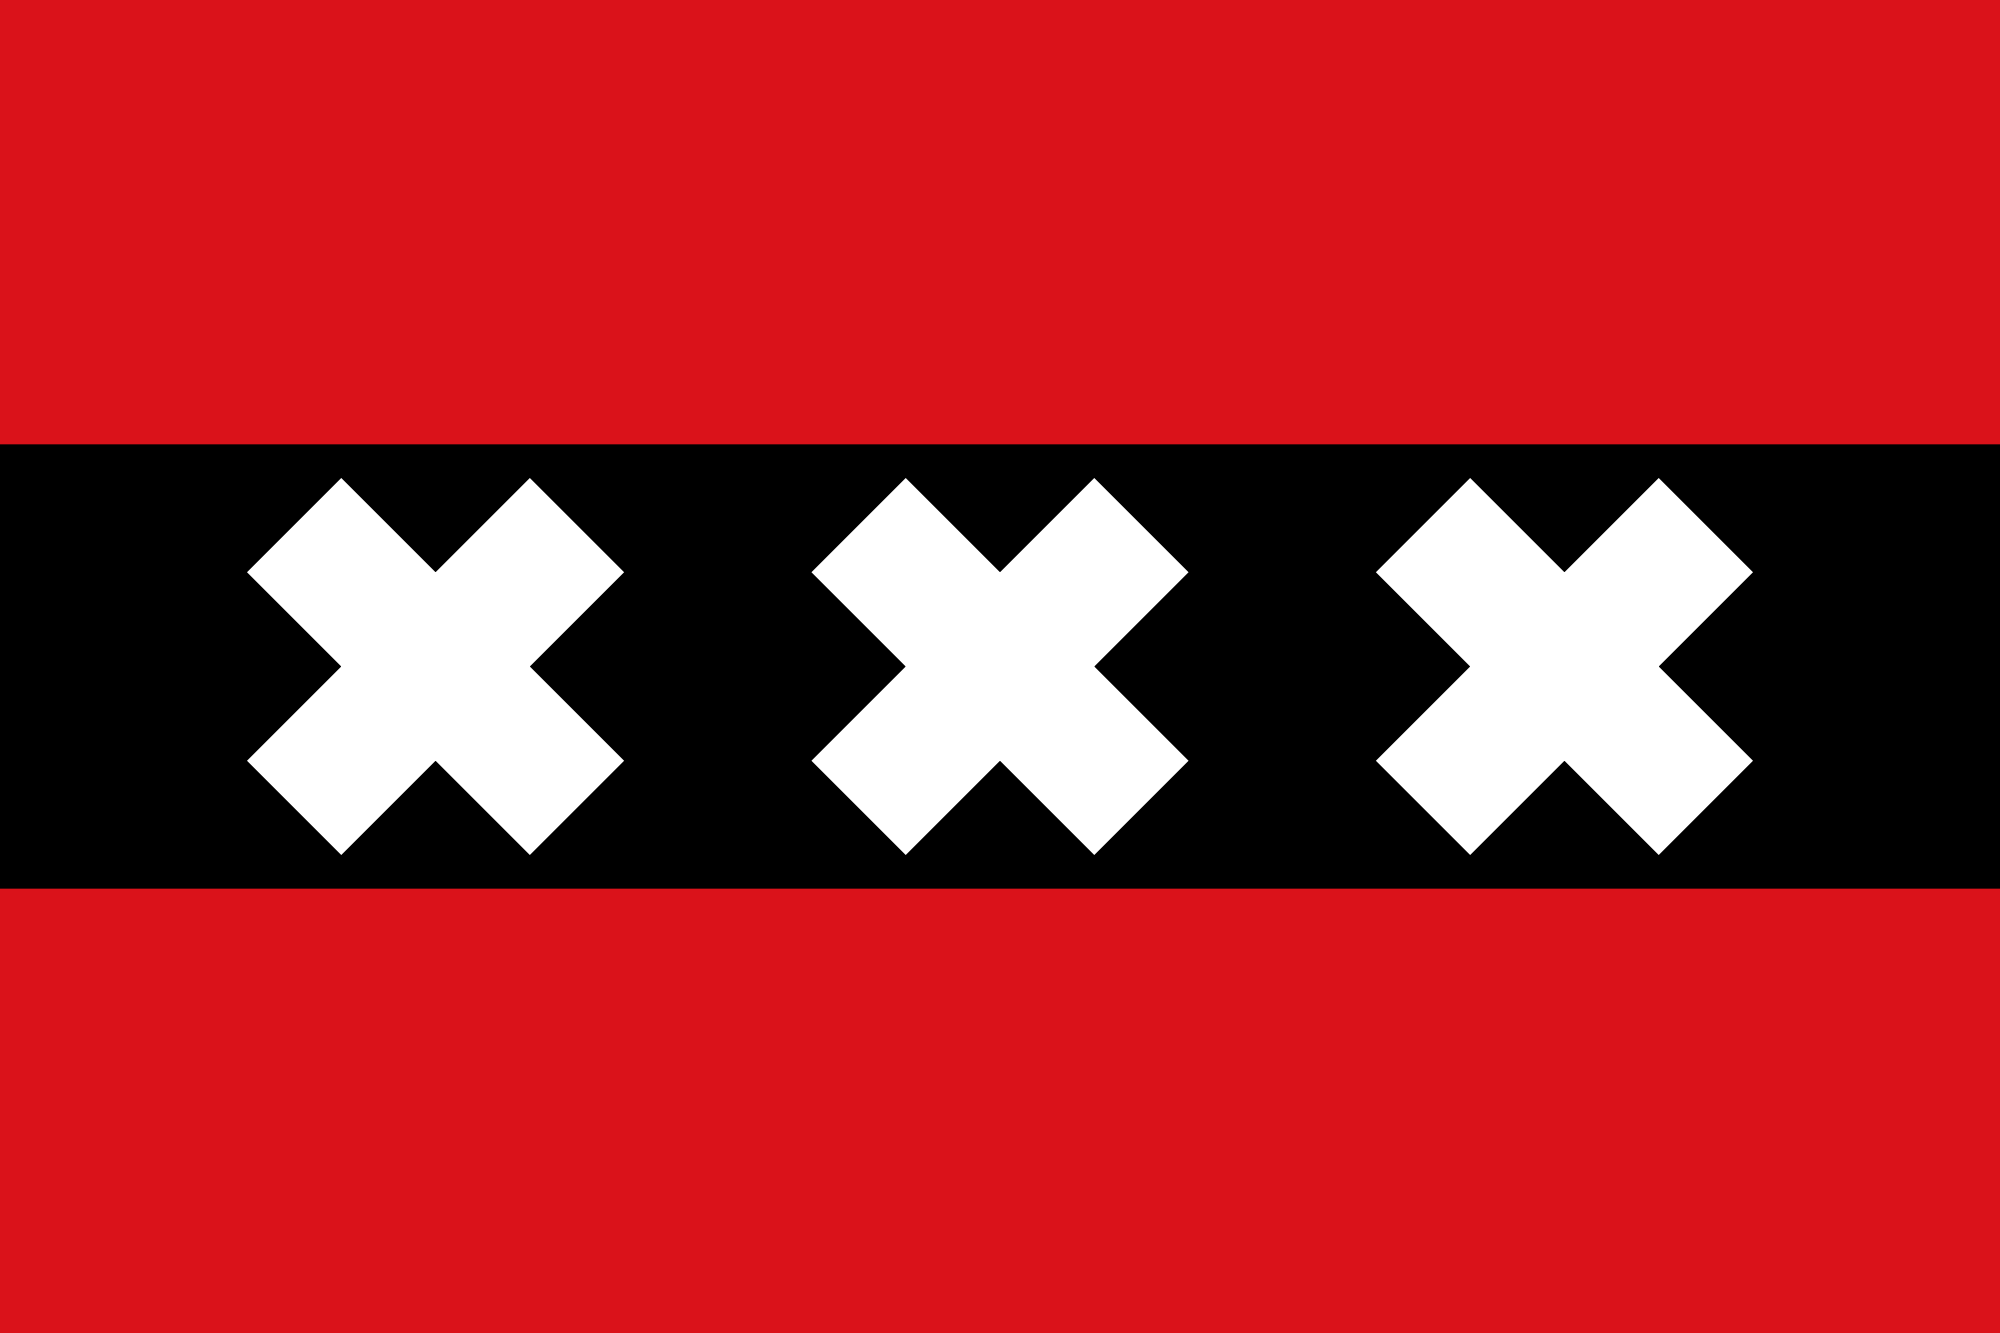 Red Rectangle with White X Logo - File:Flag of Amsterdam.svg - Wikimedia Commons